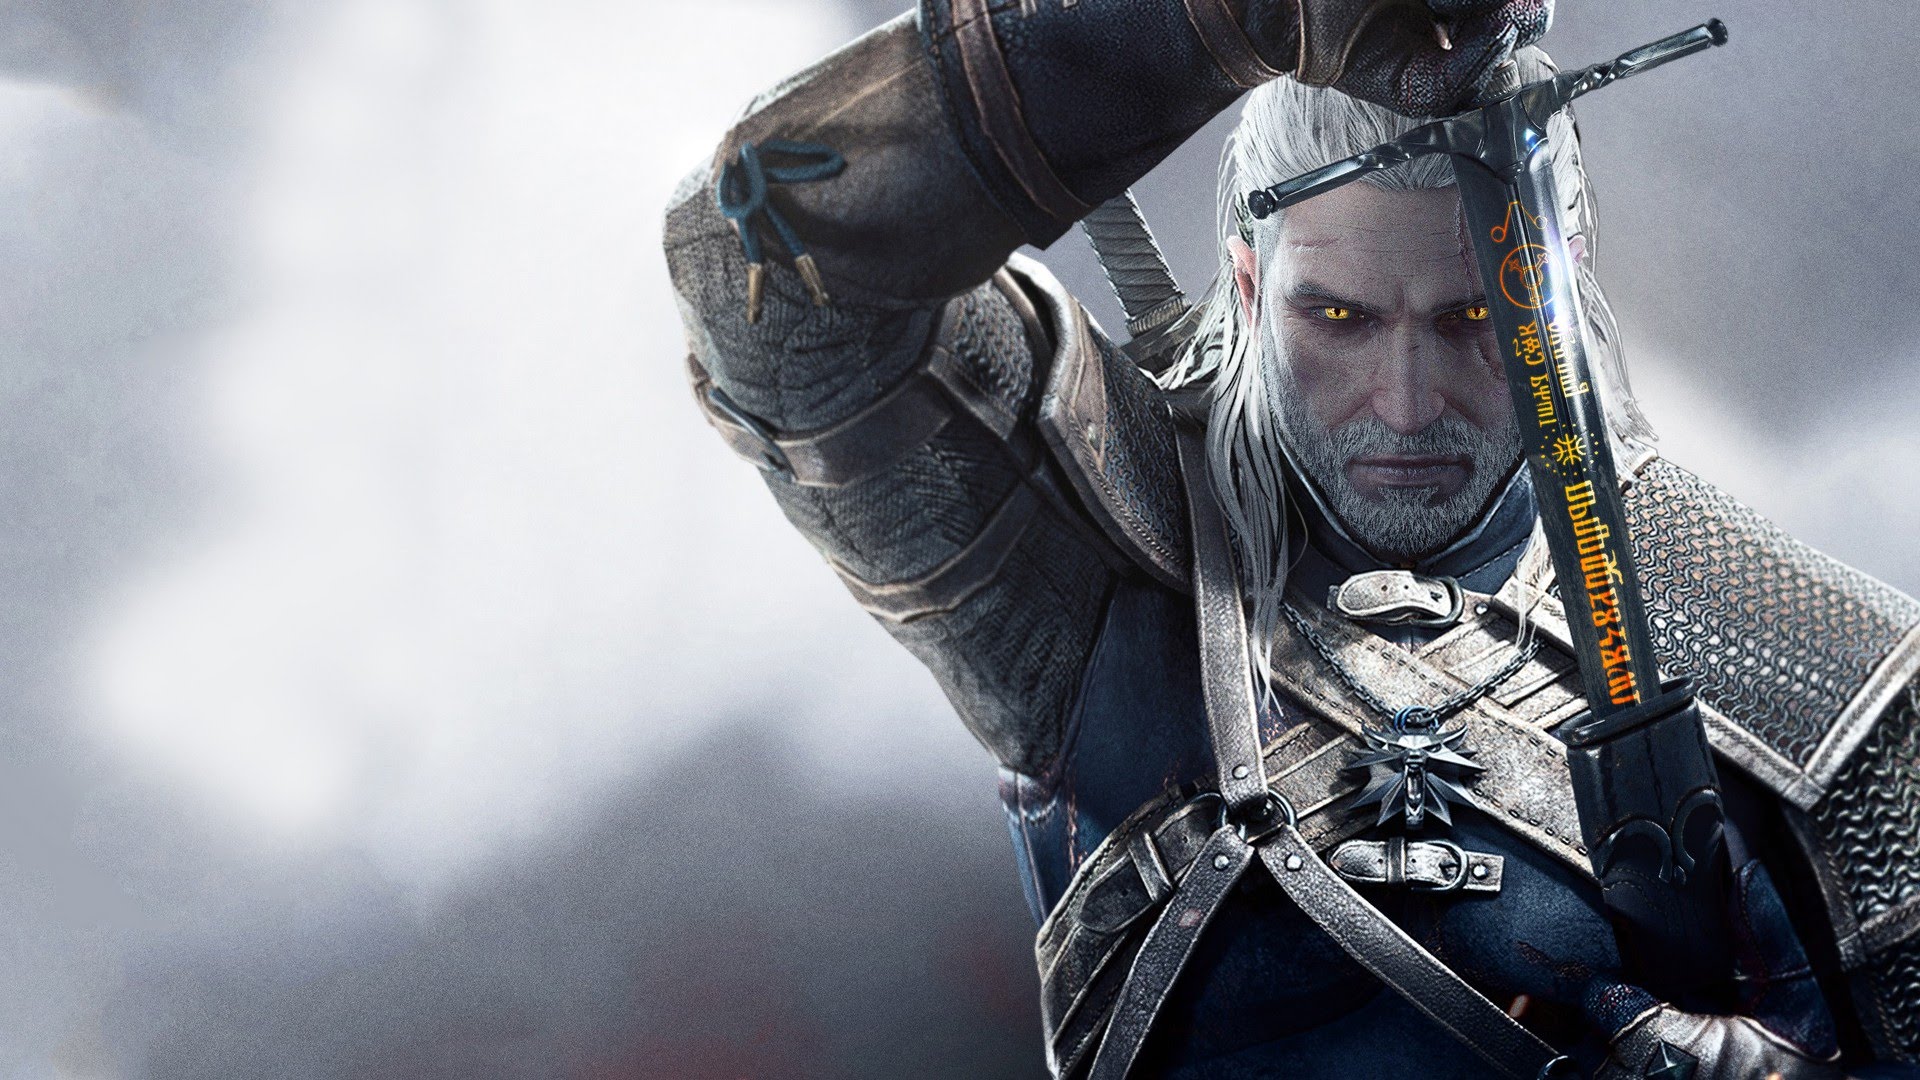 Nice Images Collection: The Witcher Desktop Wallpapers